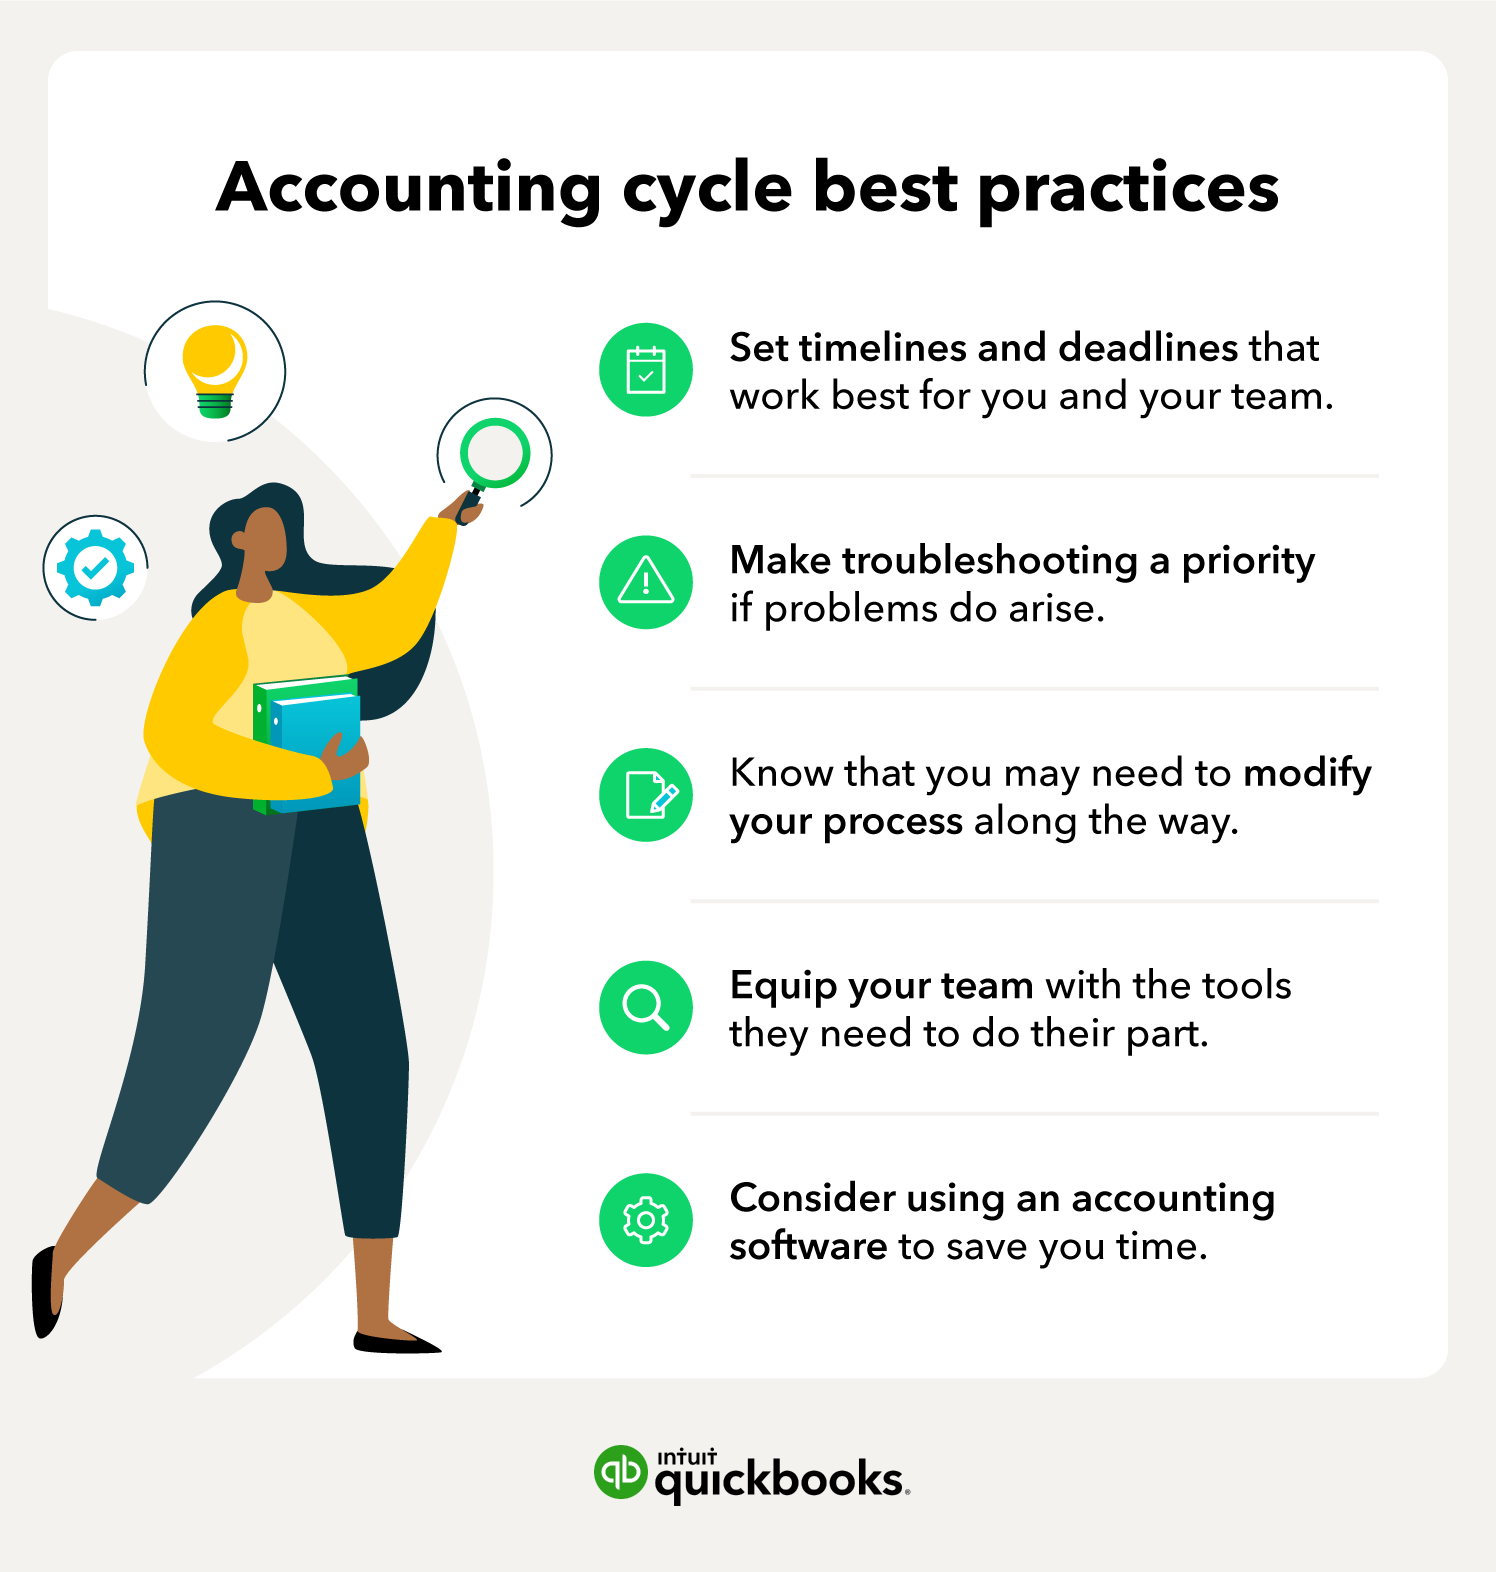 Accounting cycle best practices.